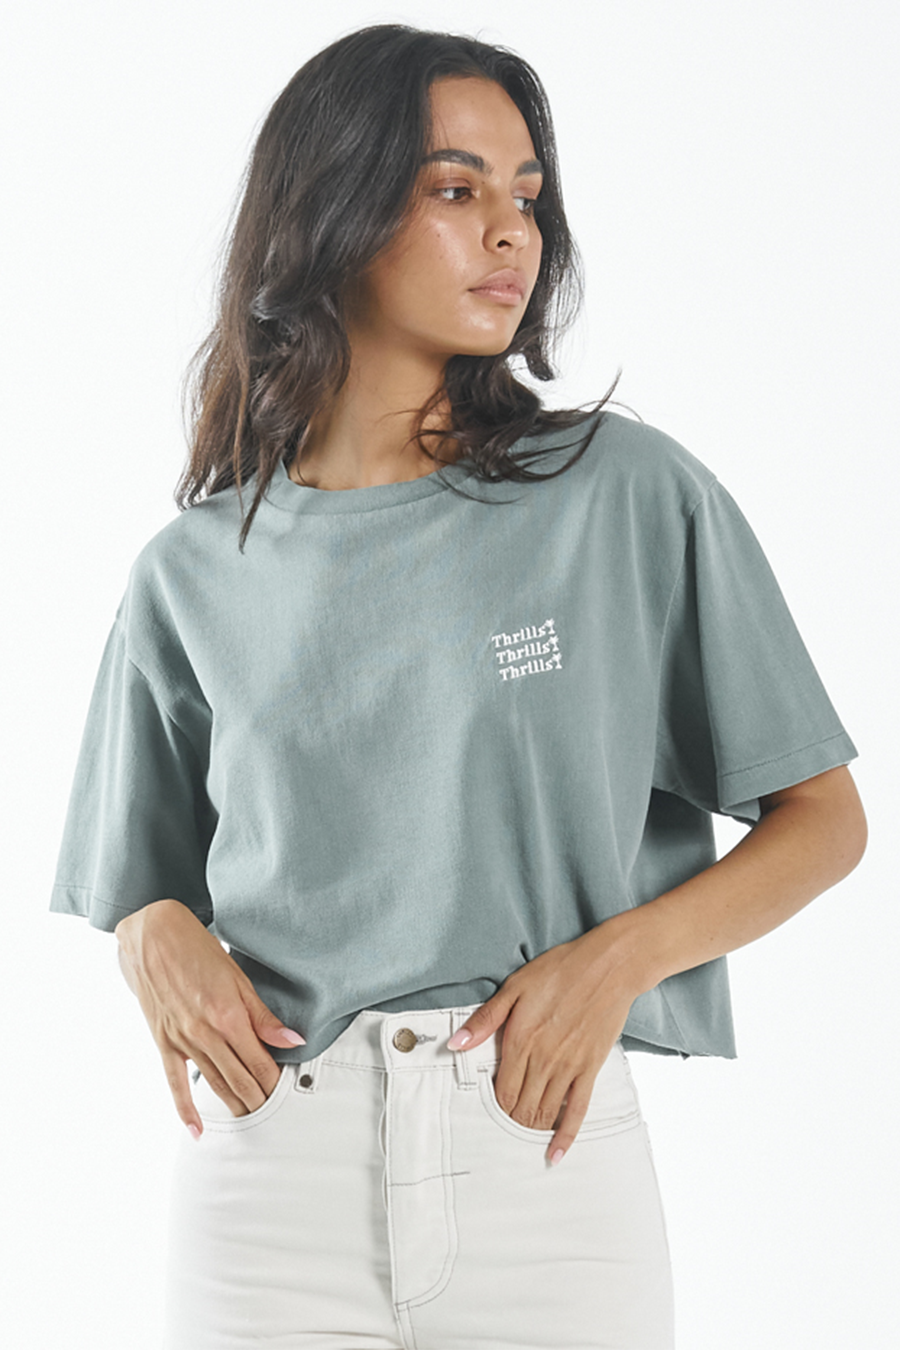 Thrills Embro Crop Tee | Lume Green - Main Image Number 1 of 1